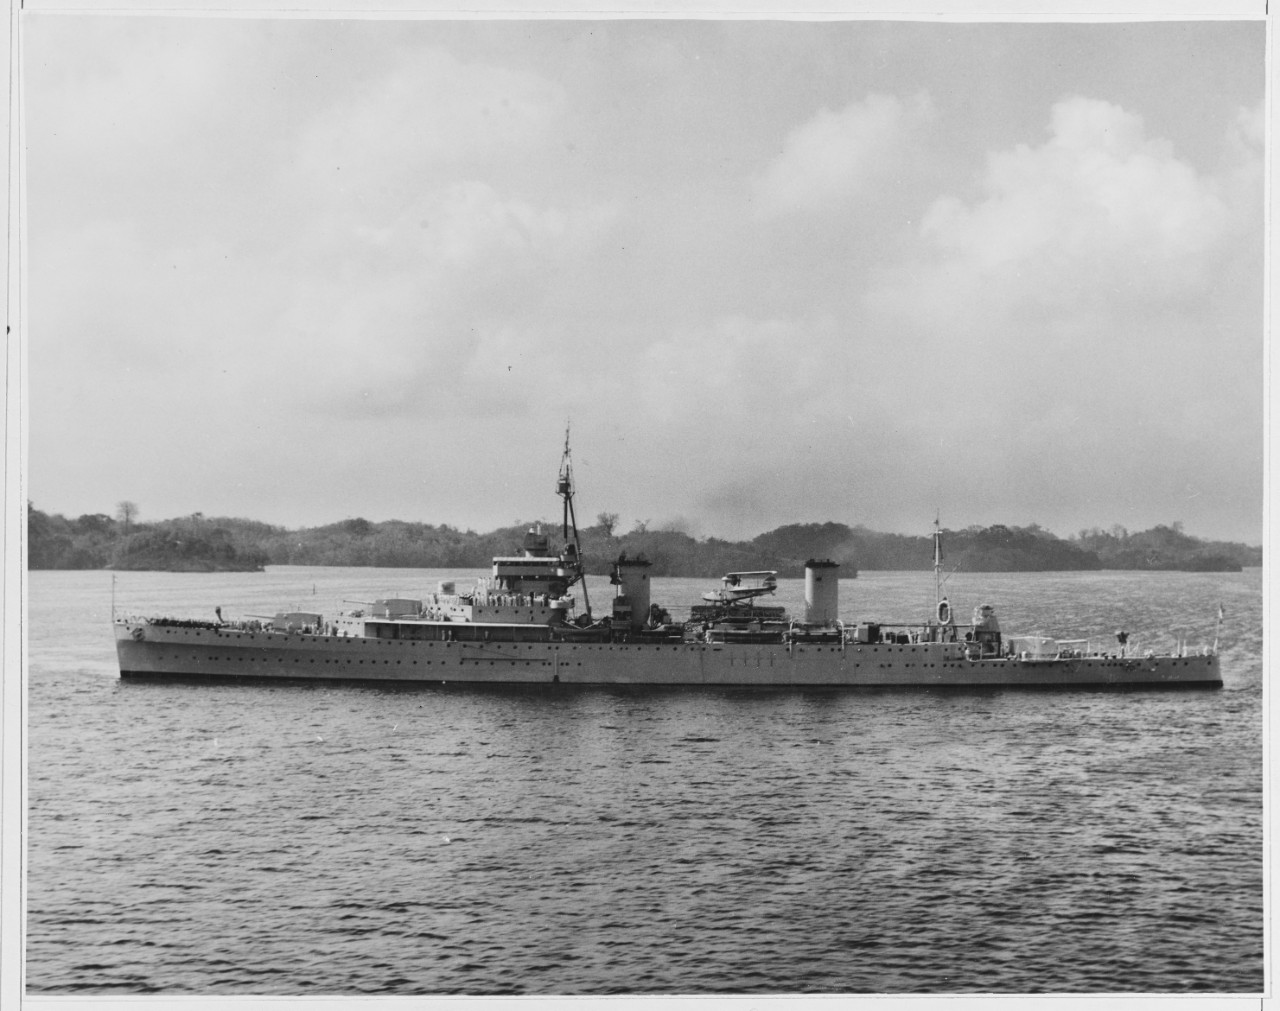 LA ARGENTINA, Argentine cruiser, 1937, off the Panama Canal, 2 May 1940